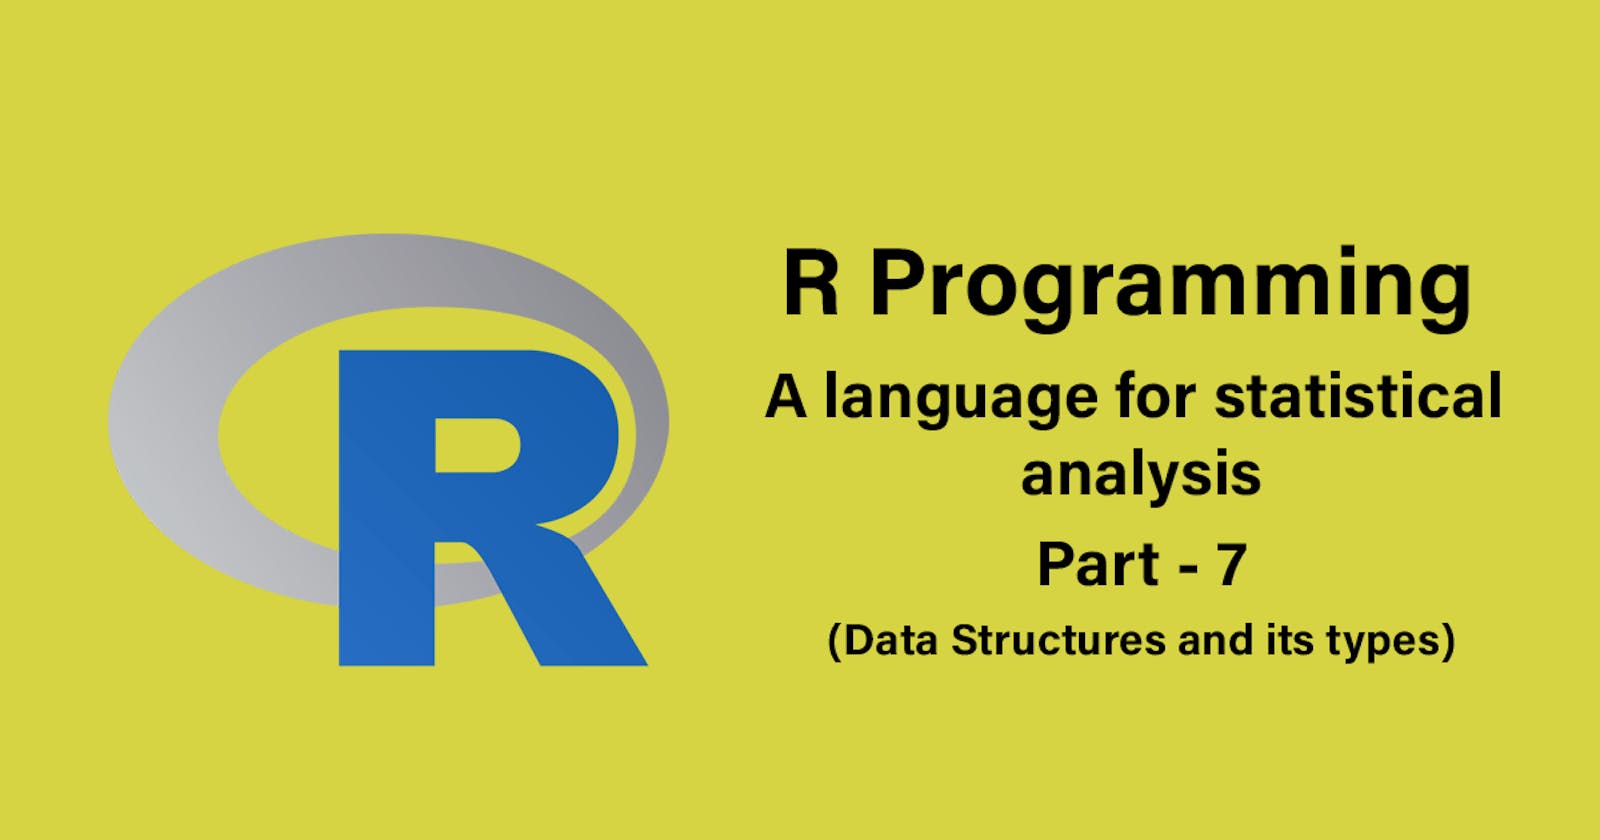 R programming - Data Structures